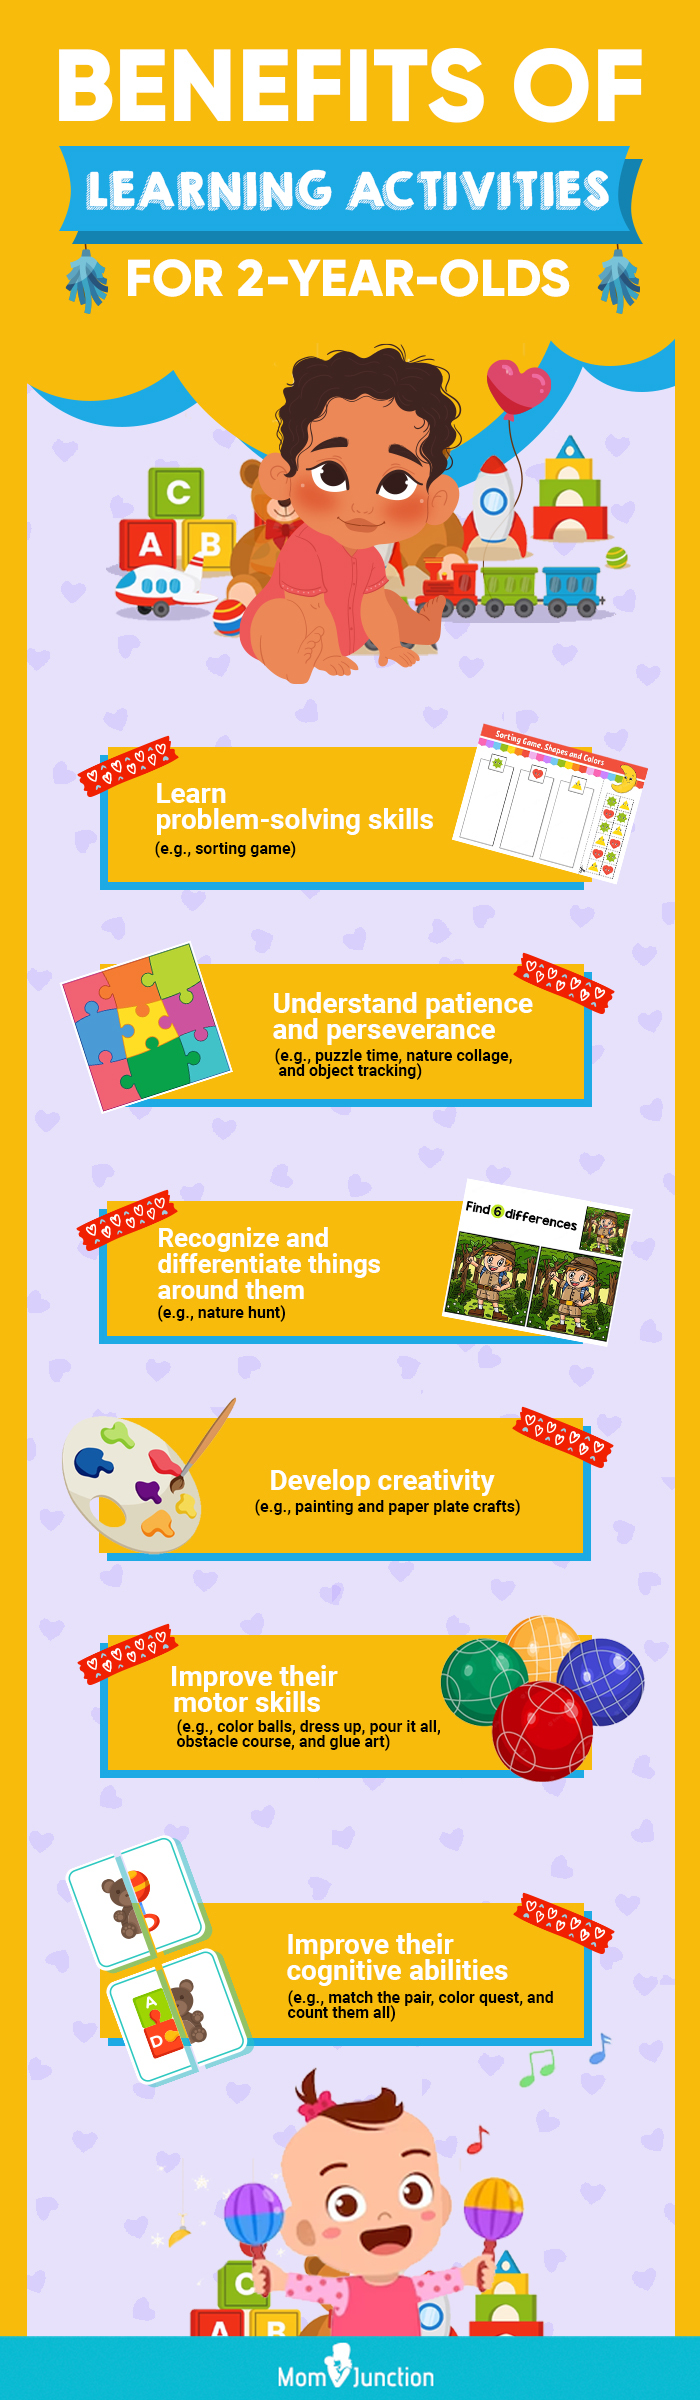 benefits of learning activities for 2 year olds(infographic)